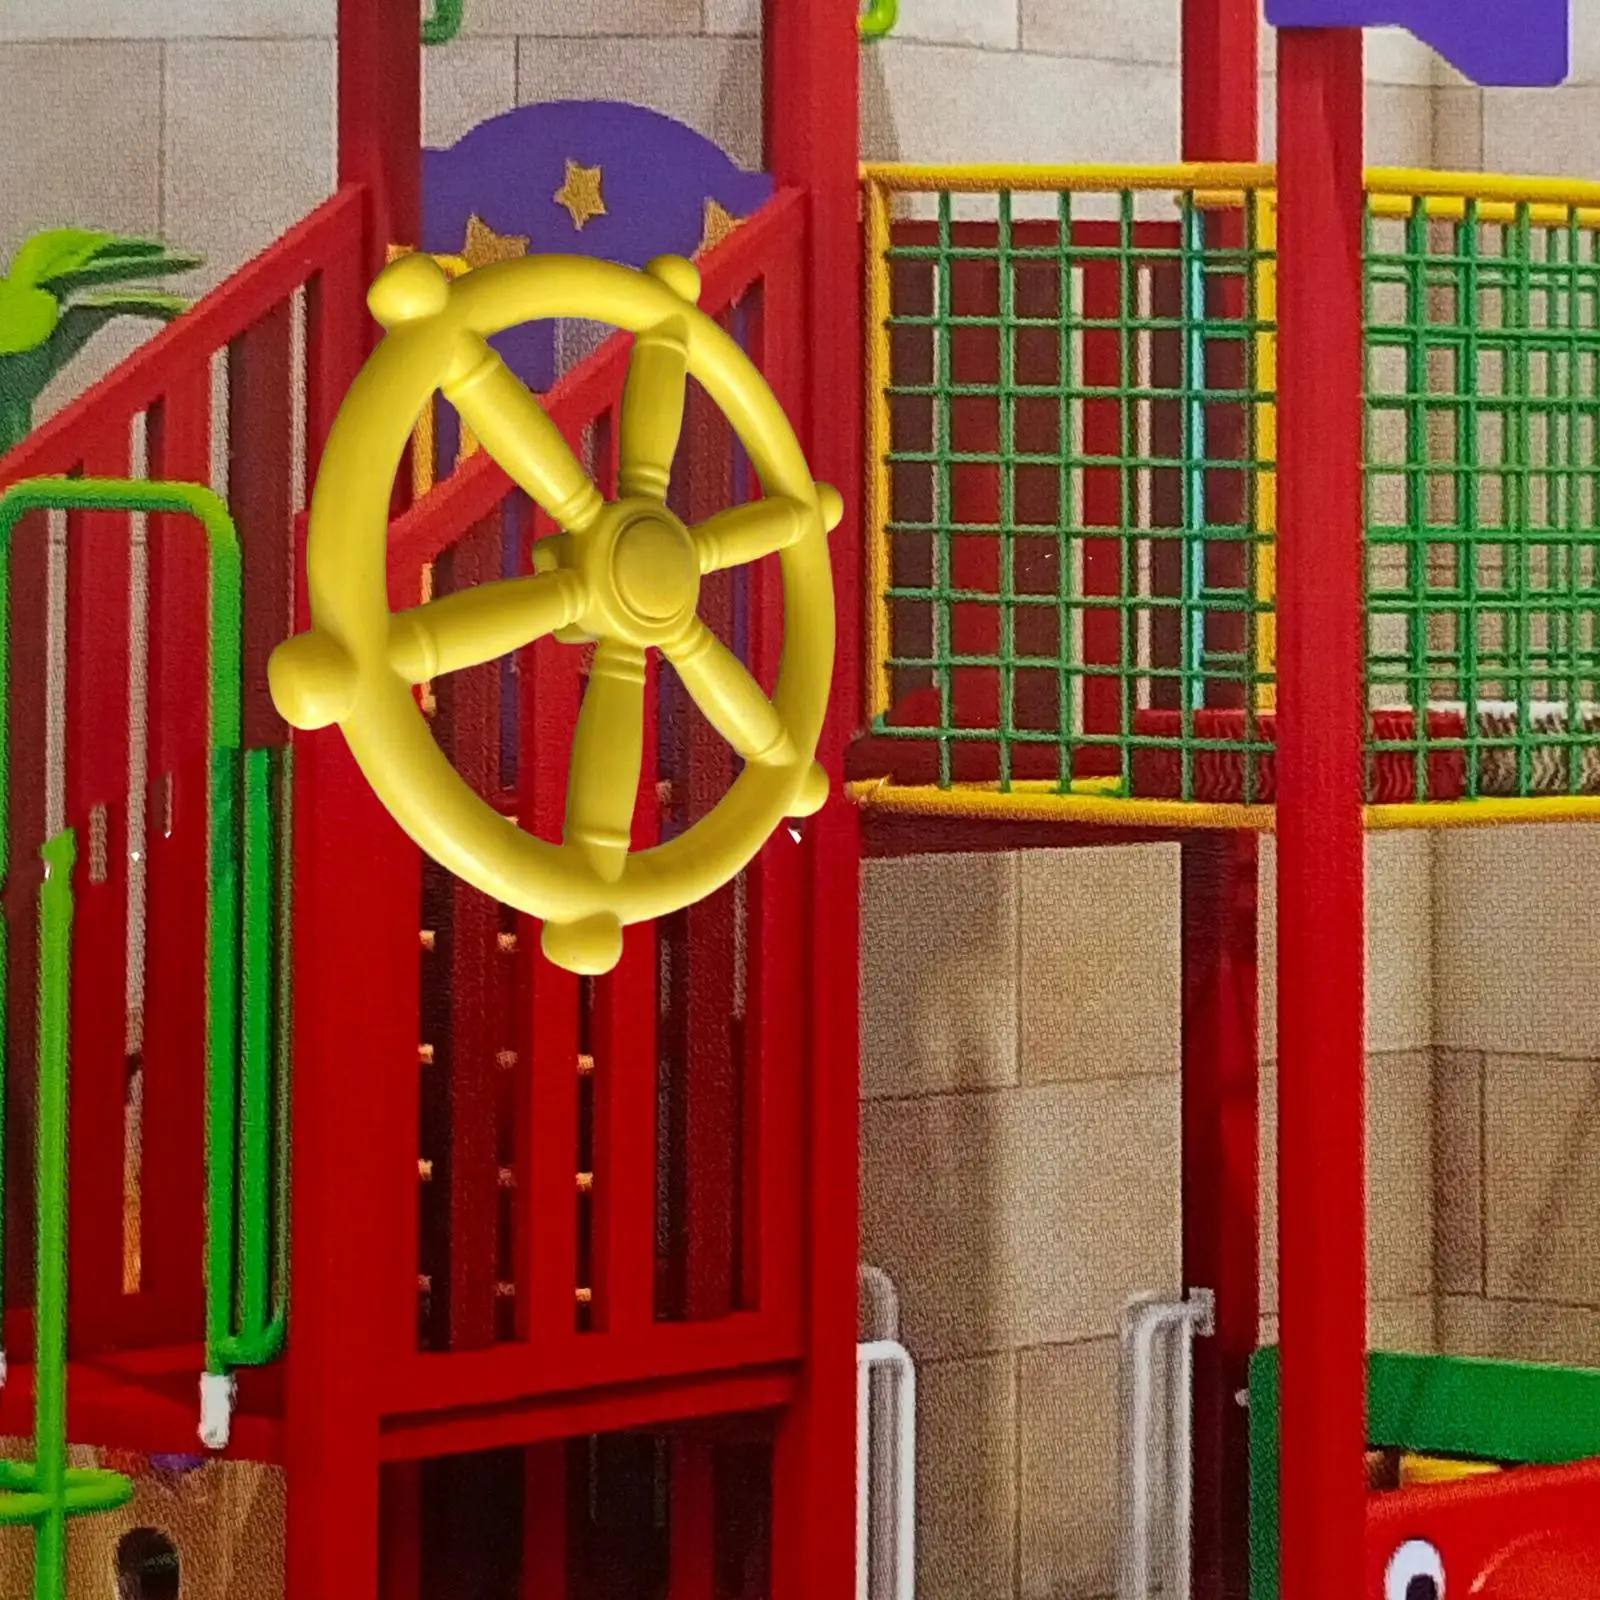 Pirate Ship Wheel Multipurpose Climb with Screws Playground Equipment Kids Steering Wheel Toy for Park Play House Treehouse